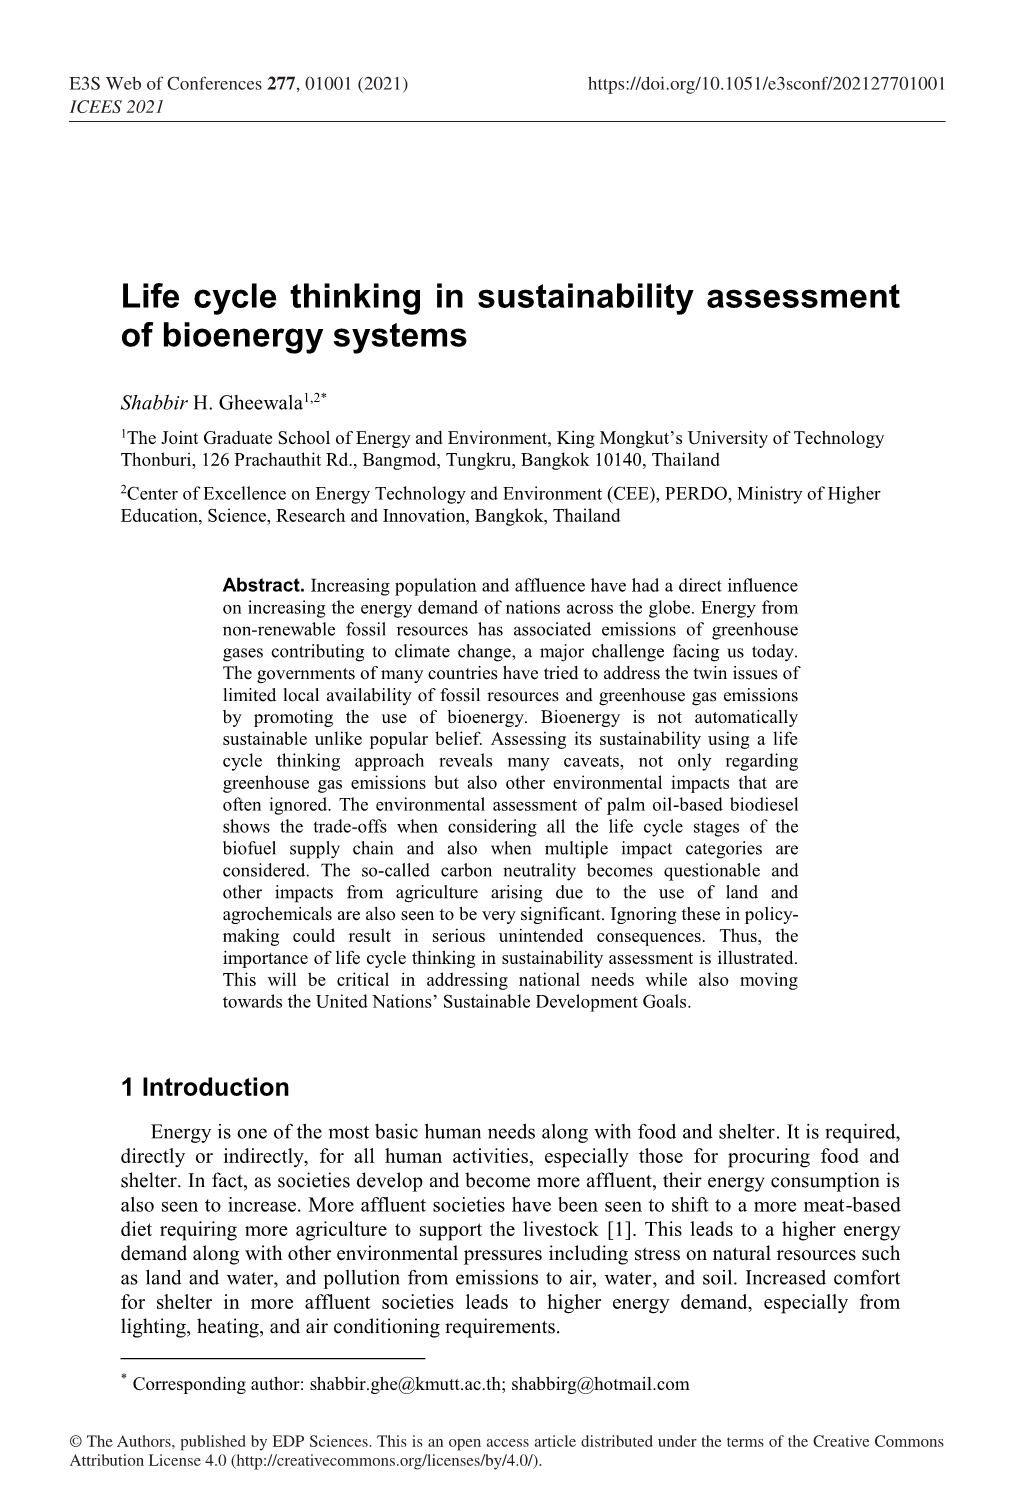 Life Cycle Thinking in Sustainability Assessment of Bioenergy Systems